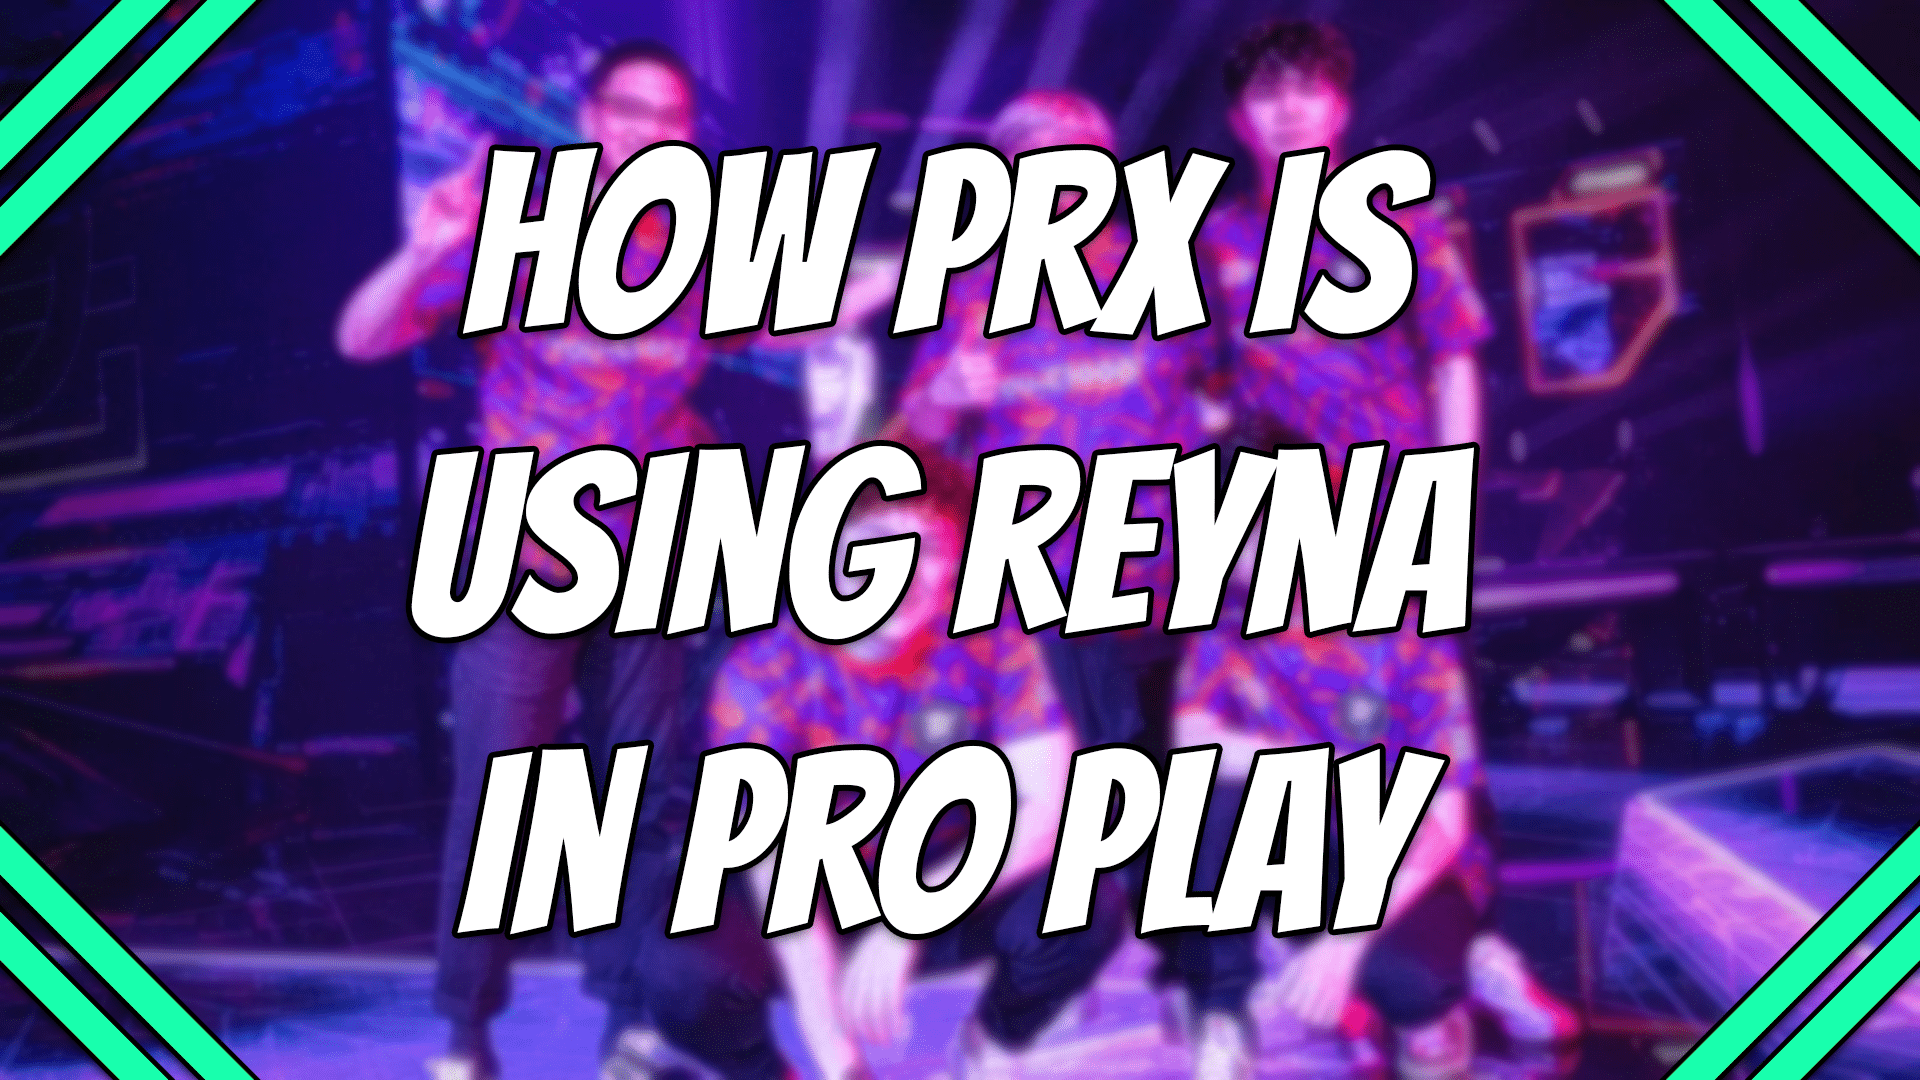 How PRX is using reyna in pro play title card